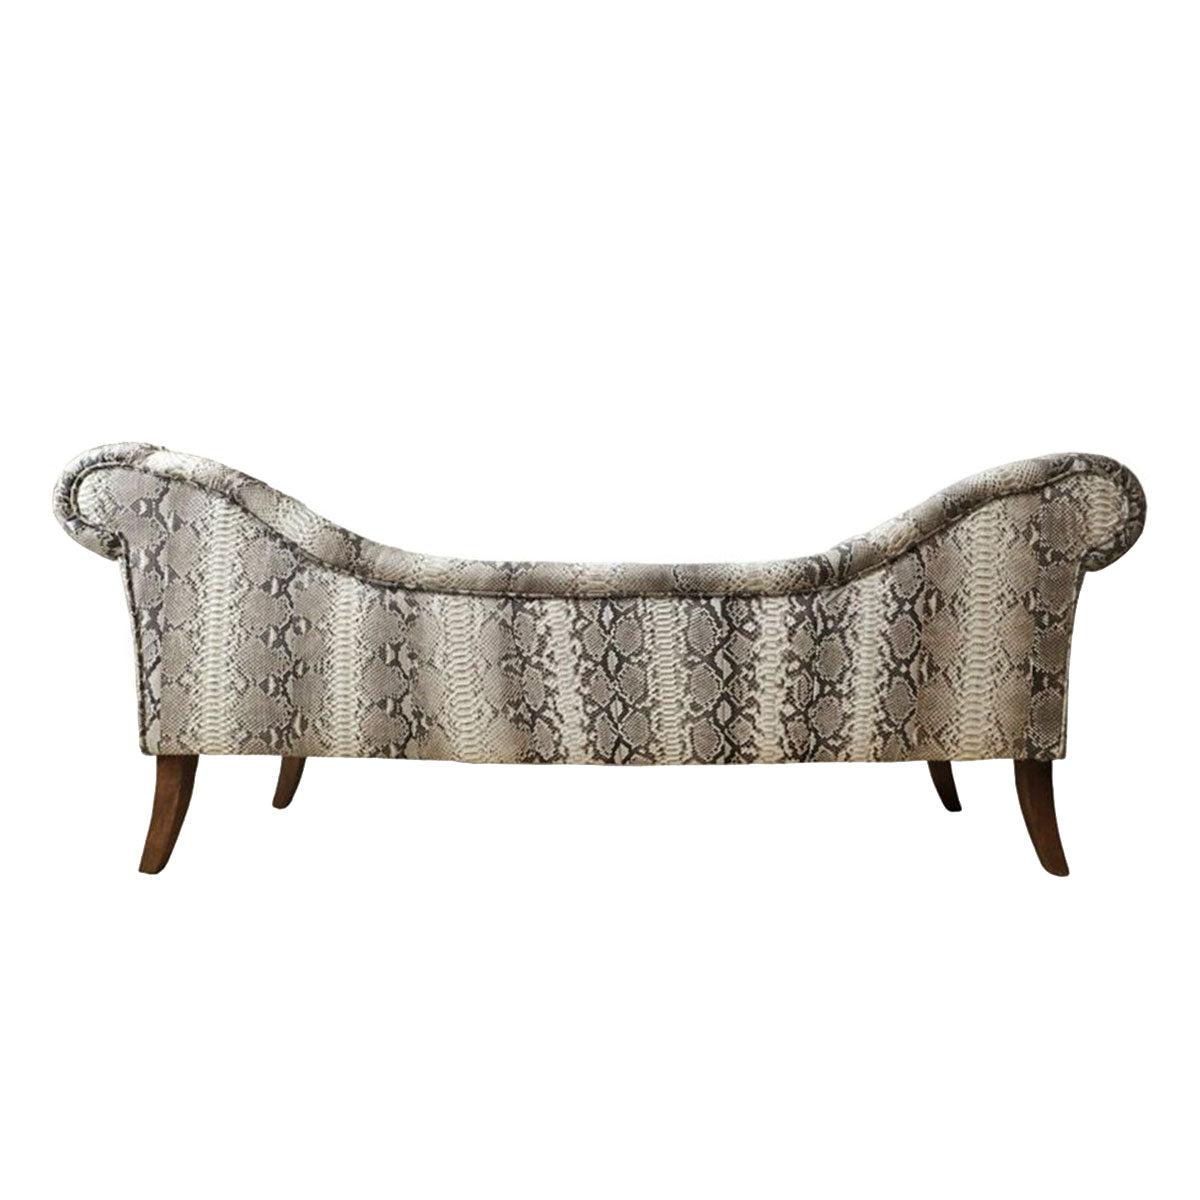 ​Sofa made of french pine wood from the Landes and leather - Python